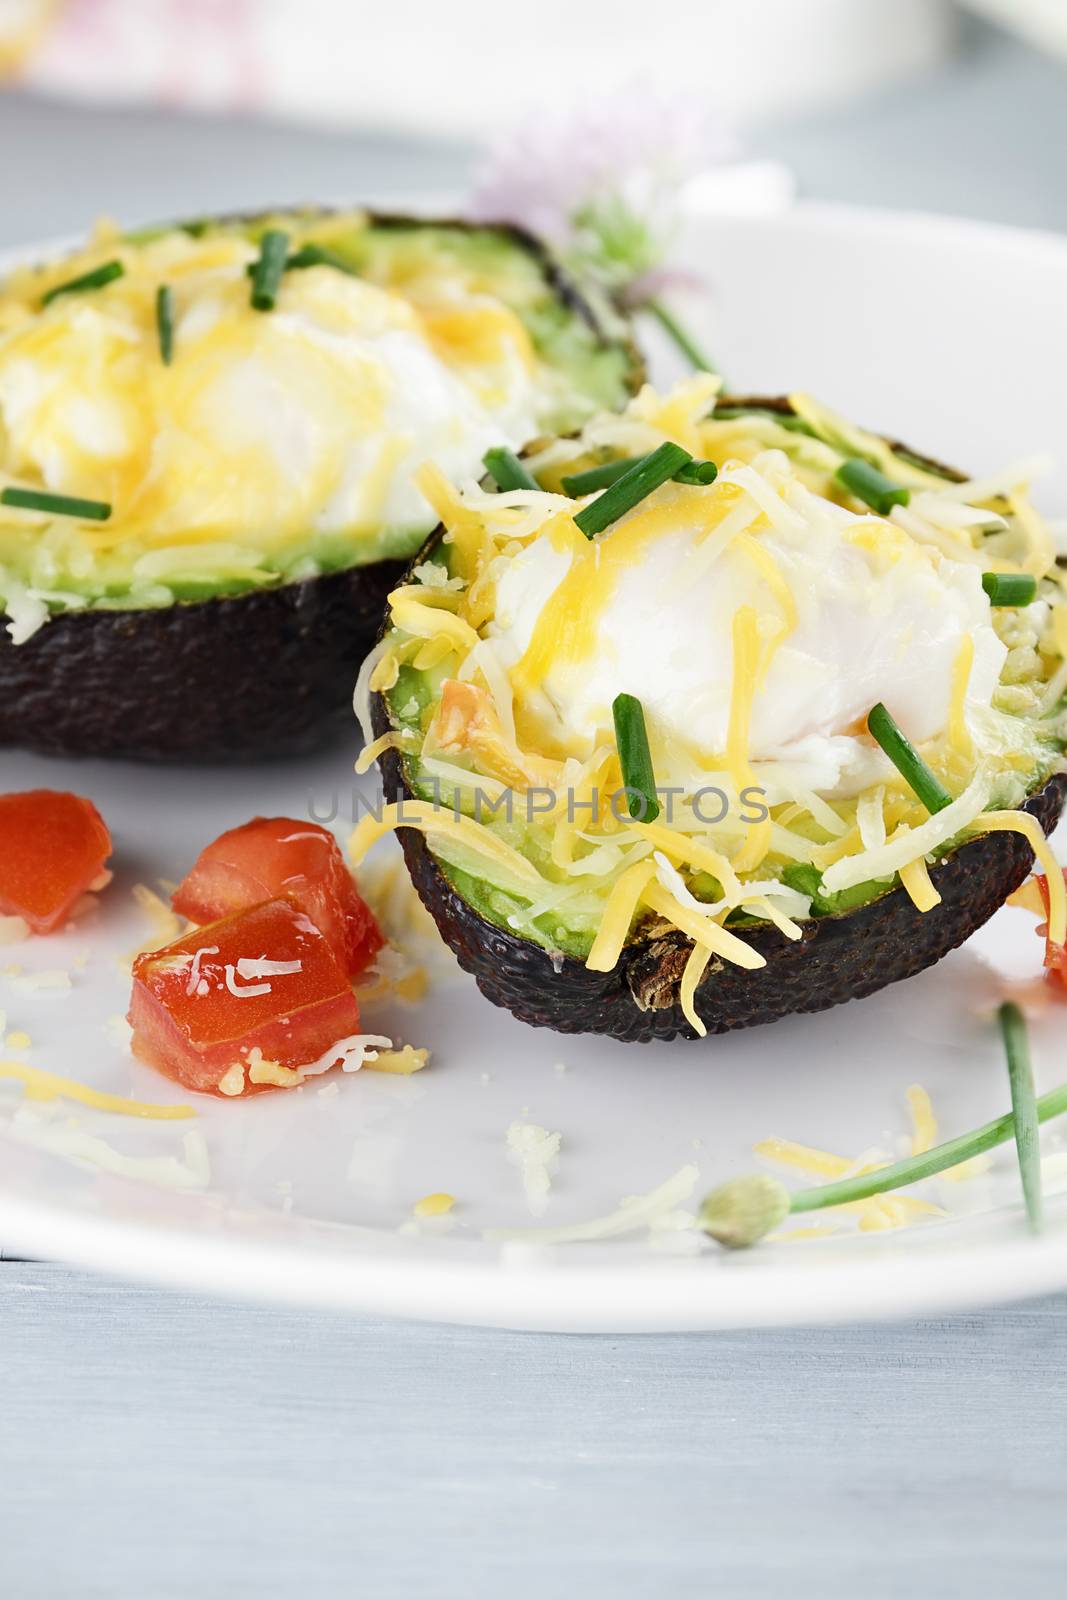 Eggs Baked in Avocado with Cheese by StephanieFrey